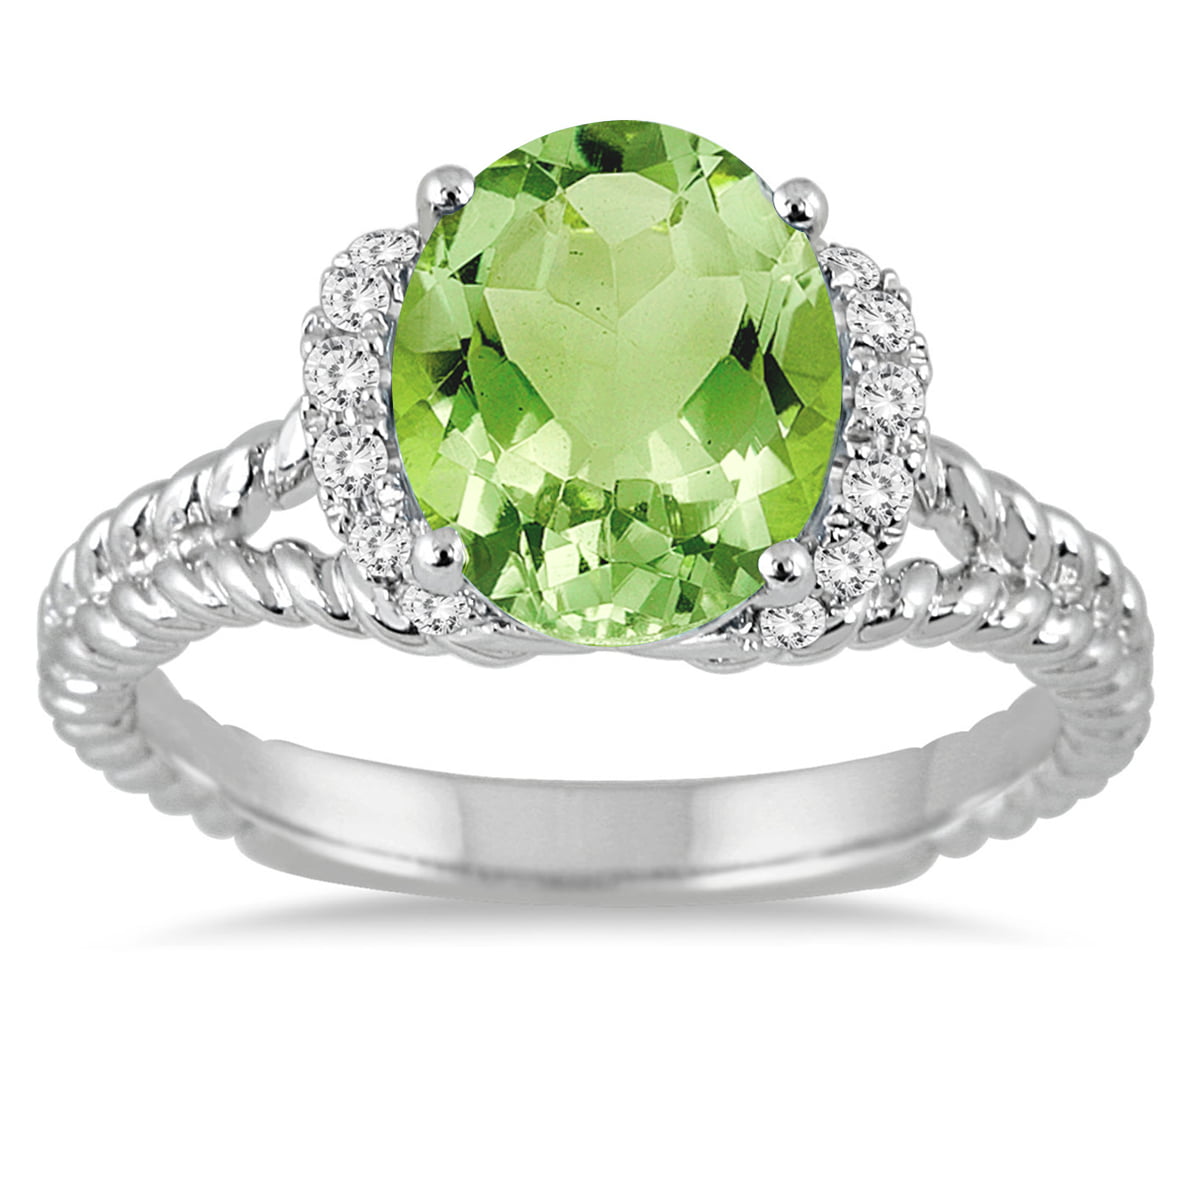 2.25 Ct Oval Brilliant Cut Green Peridot Engagement Ring 14K White Gold Over 